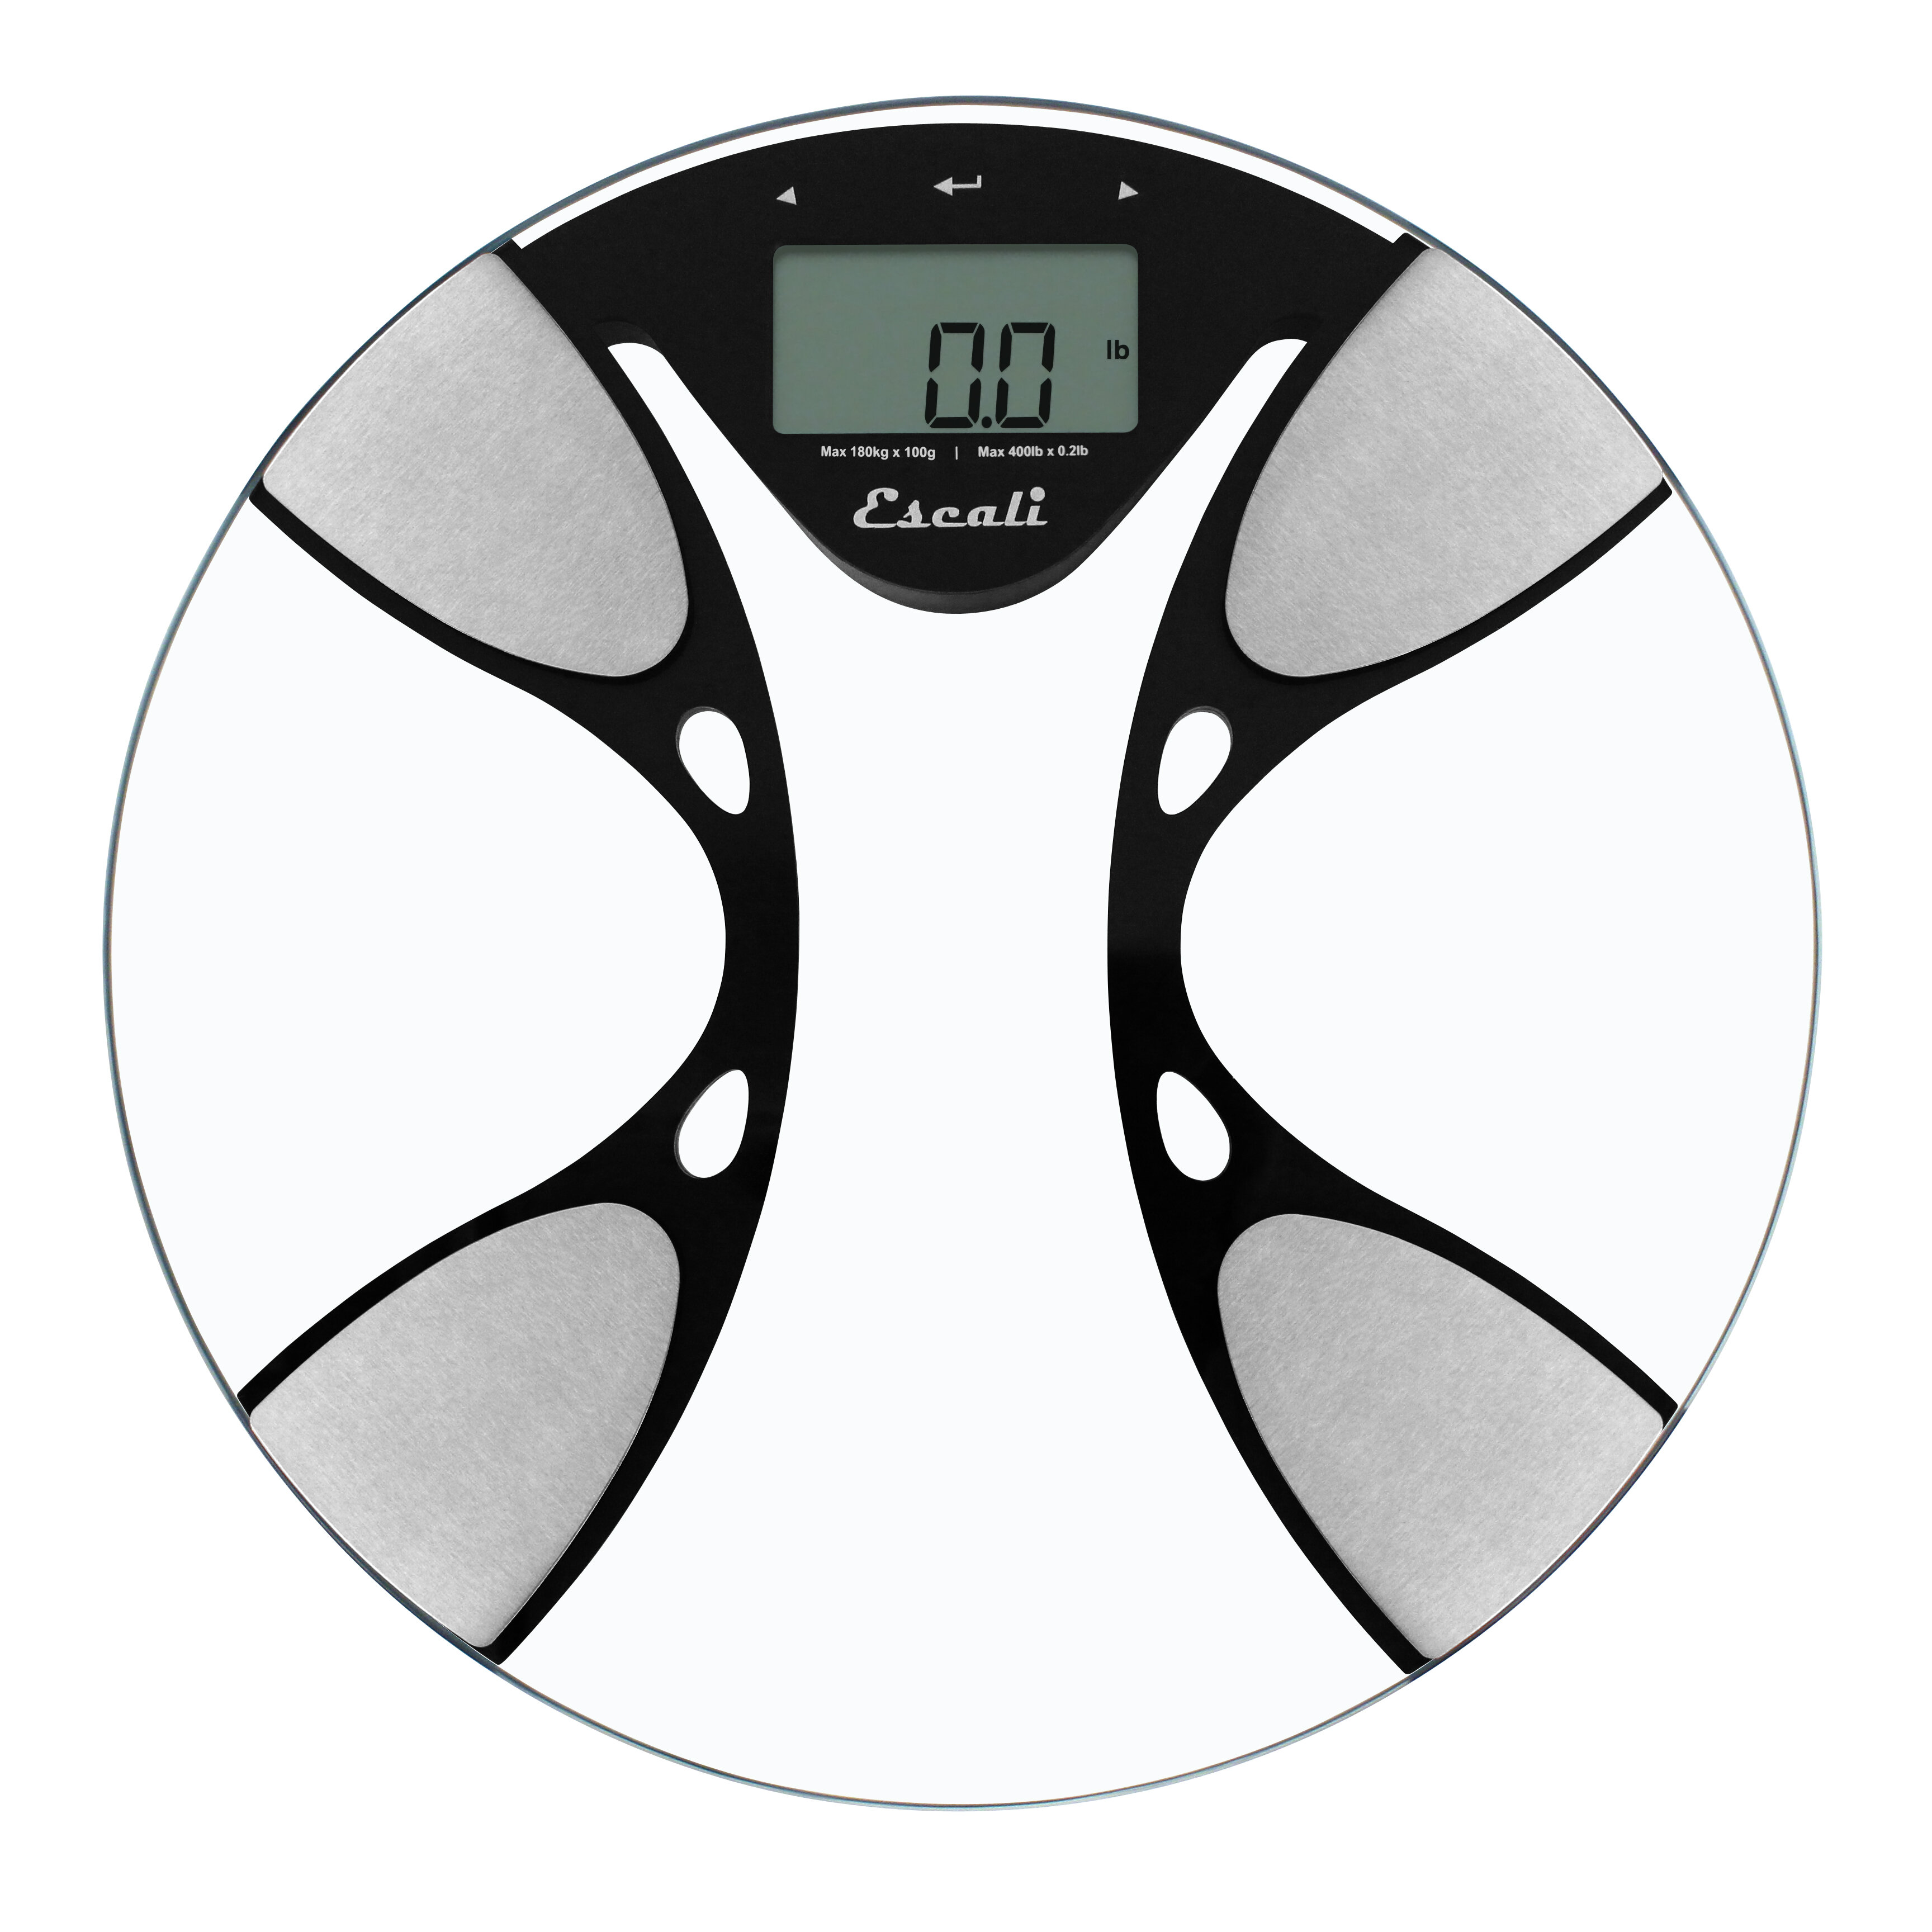 Taylor Body Composition Scale for Body Weight, Measuring Body Fat, Body  Water, Muscle Mass and BMI, 400 lb. Capacity, White/Black